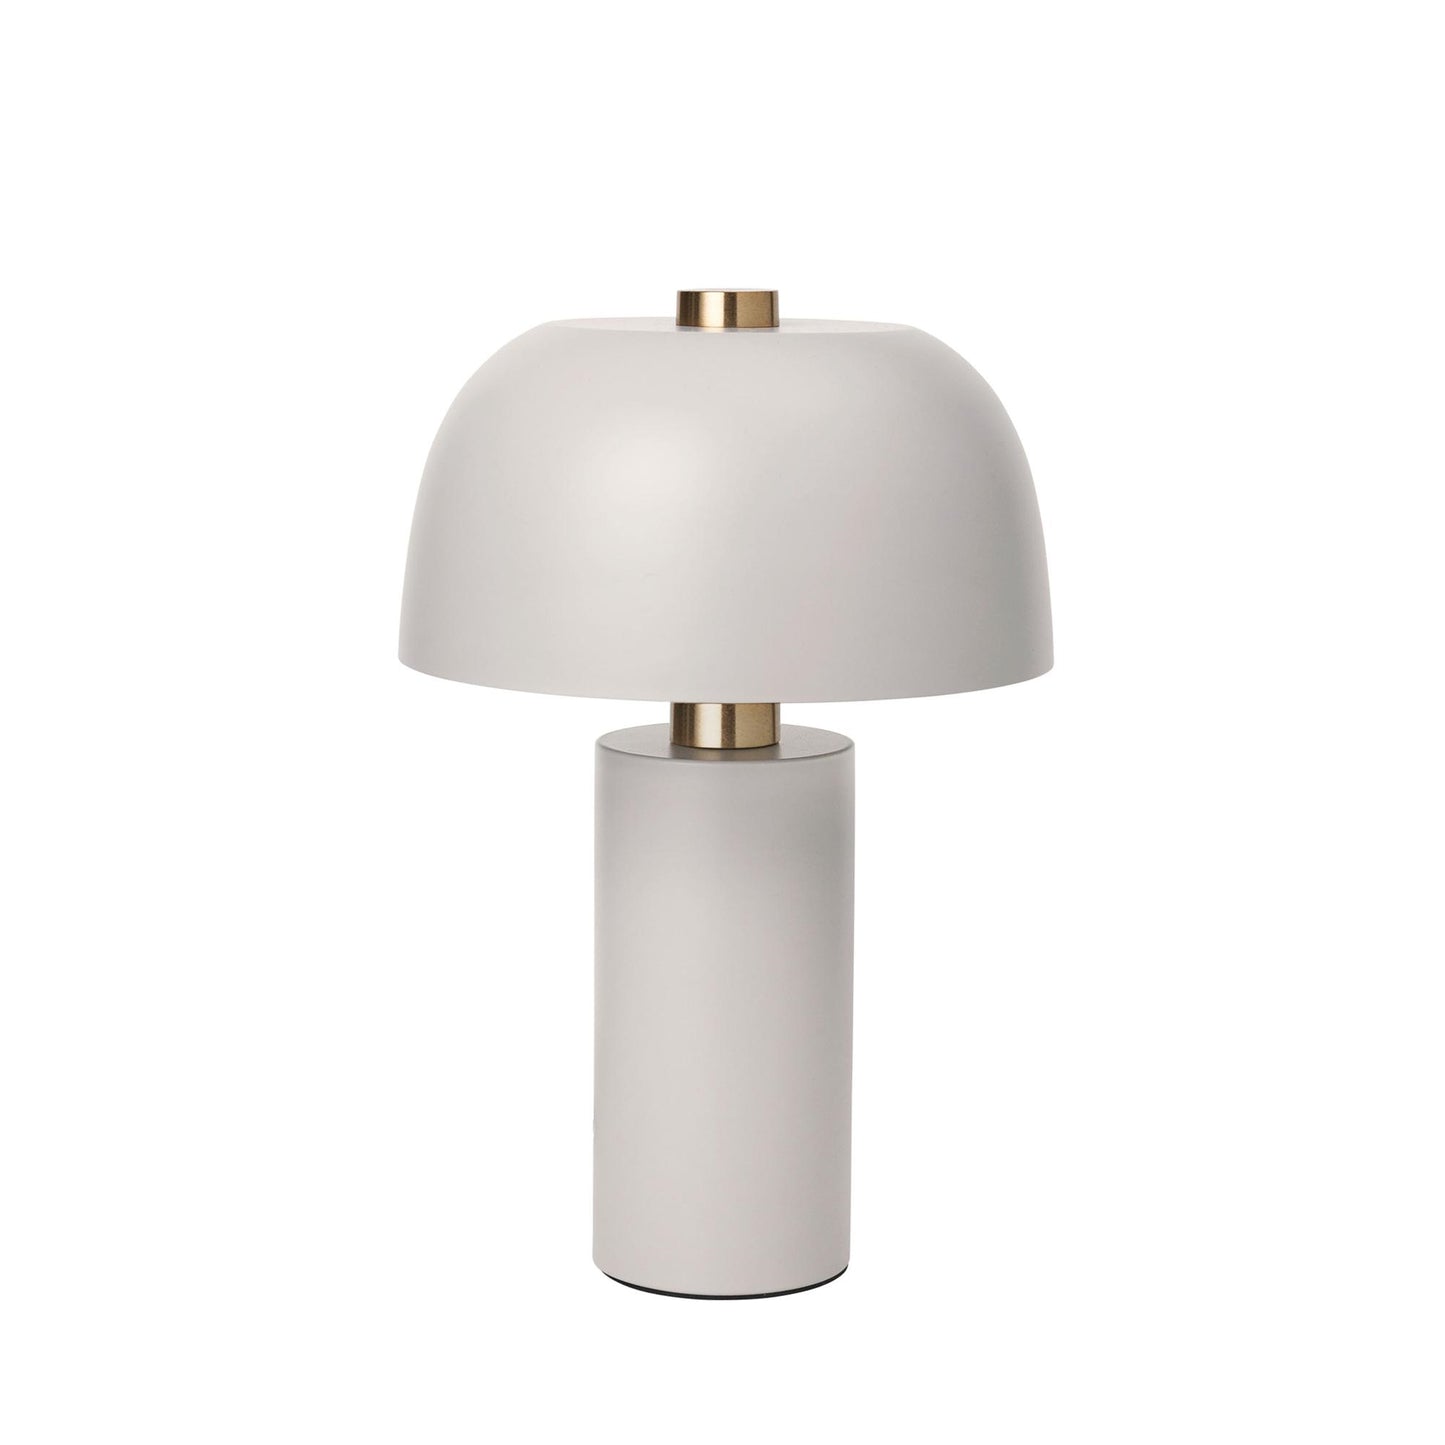 Lulu Table Lamp by Cozy Living #Light Taupe